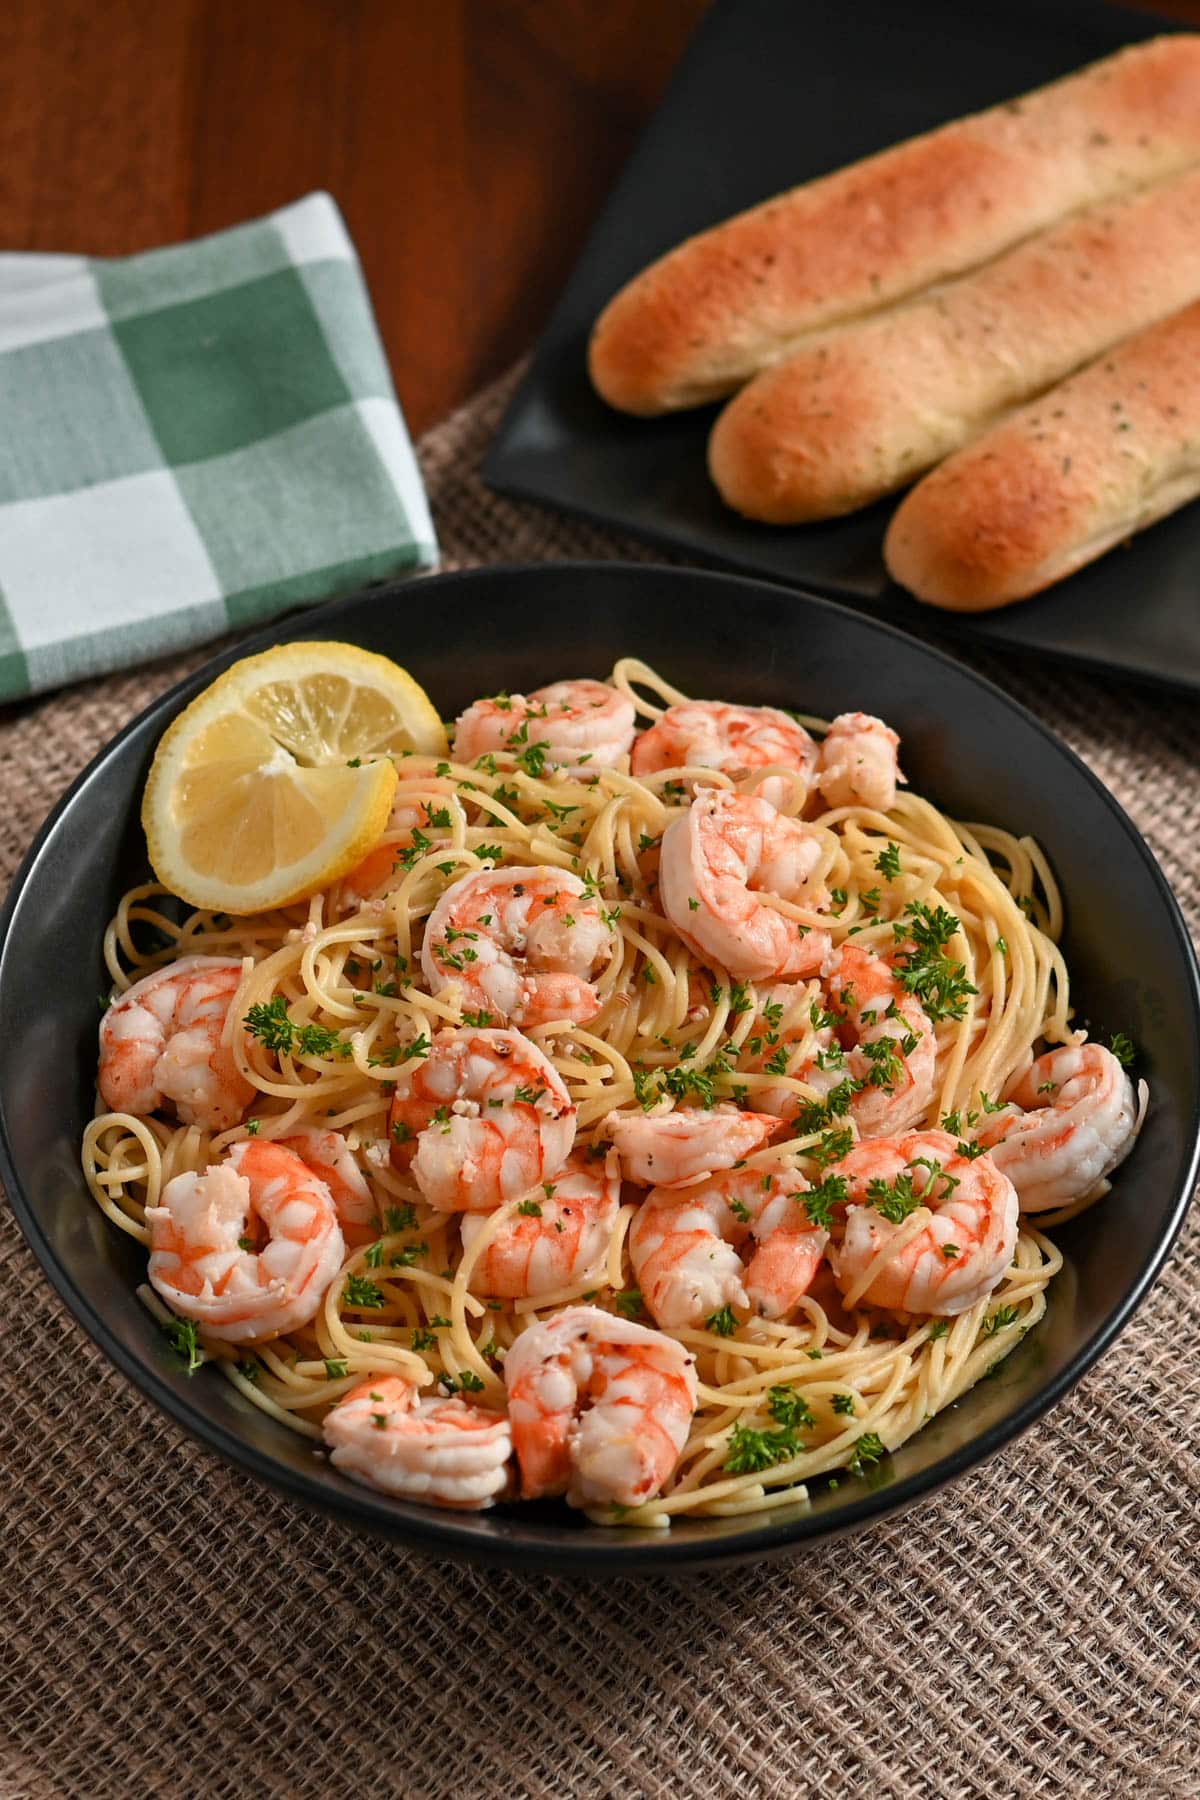 A plate of lemon shrimp pasta garnished with parsley and lemon, accompanied by breadsticks on a wooden table.